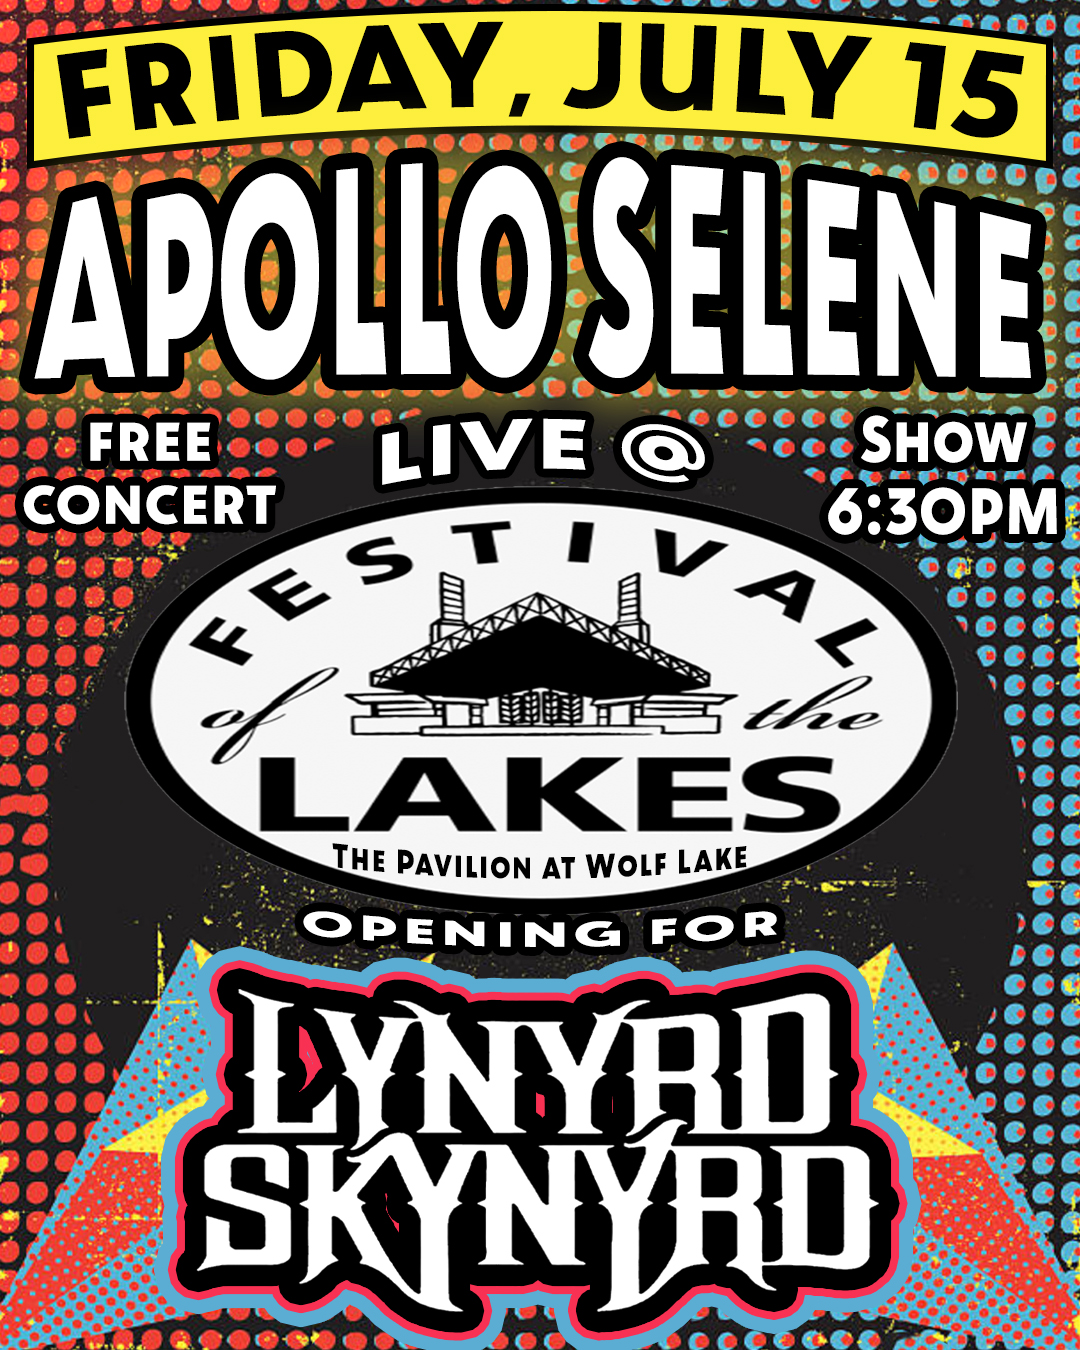 Apollo Selene LIVE The Festival of the Lakes (OPENING FOR LYNYRD